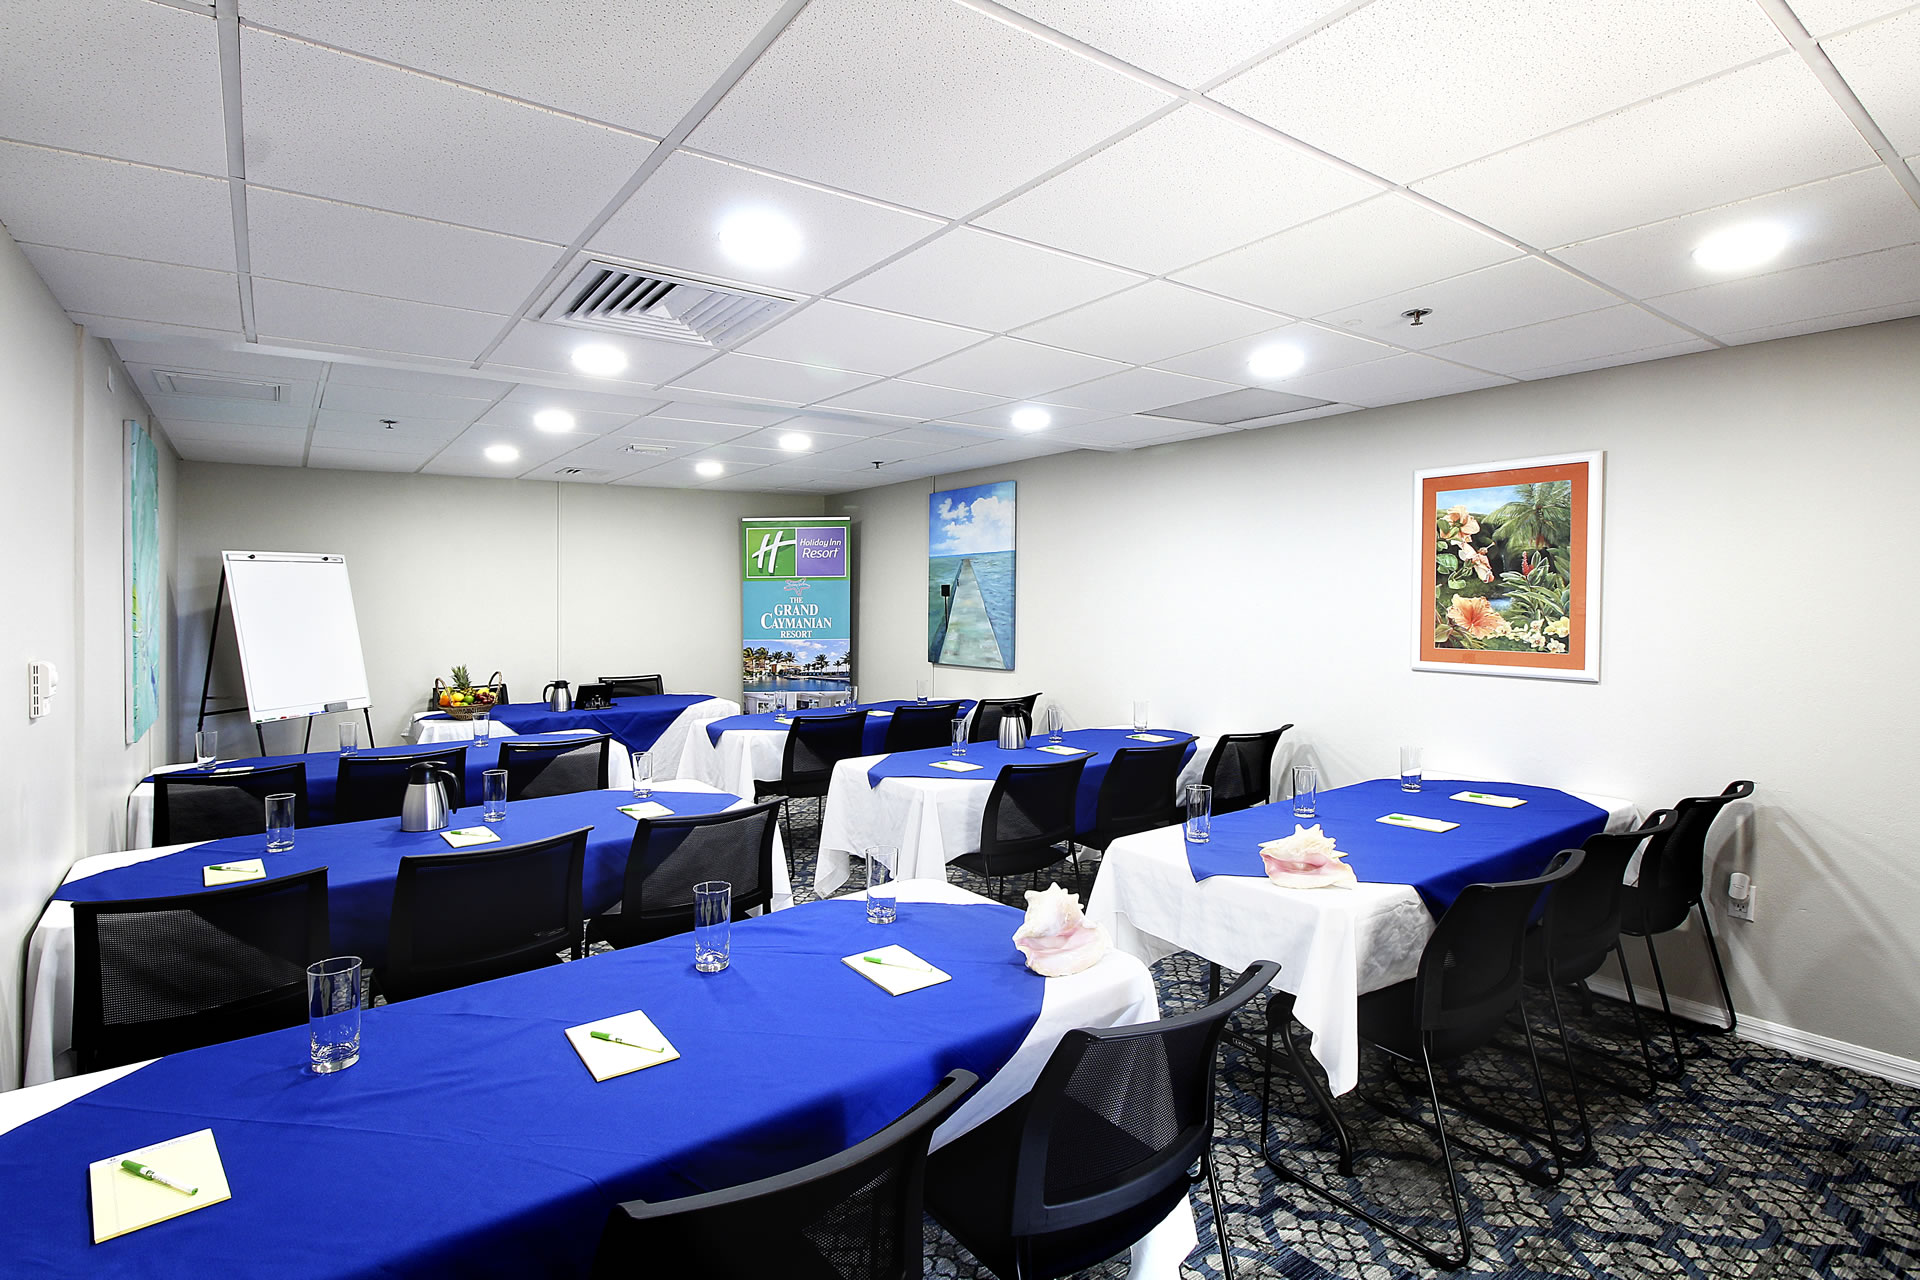 Meeting space at the Grand Caymanian Resort configured in a classroom layout with blue and white table coverings and table, banner, and easel at the front of the room.